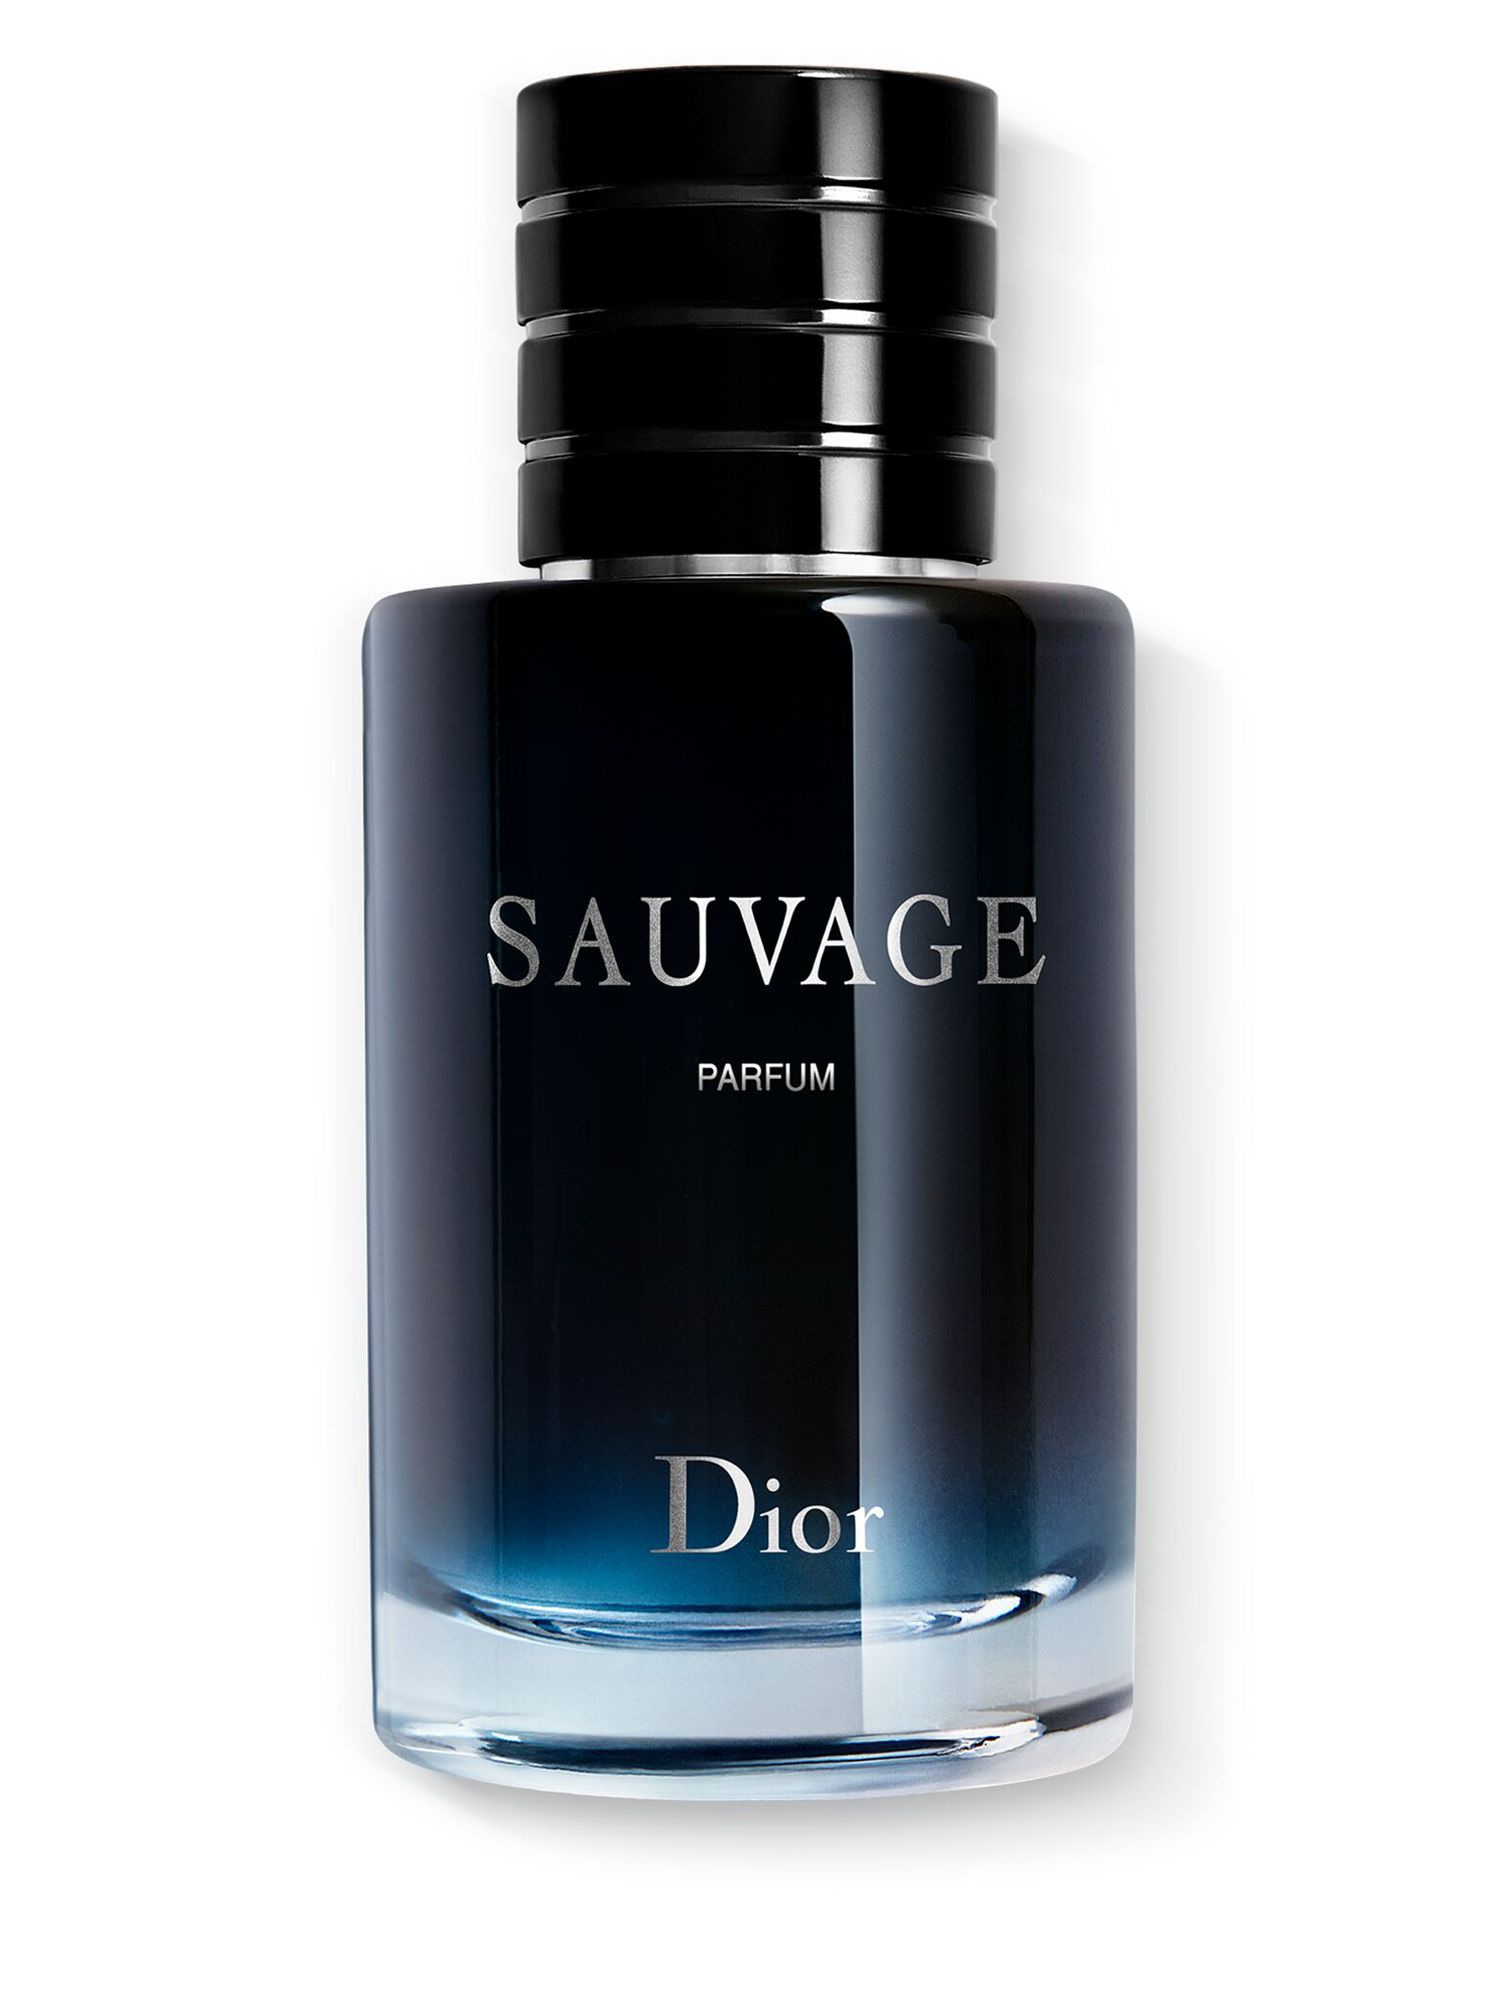 dior sauvage 60ml boots, OFF 74%,Buy!